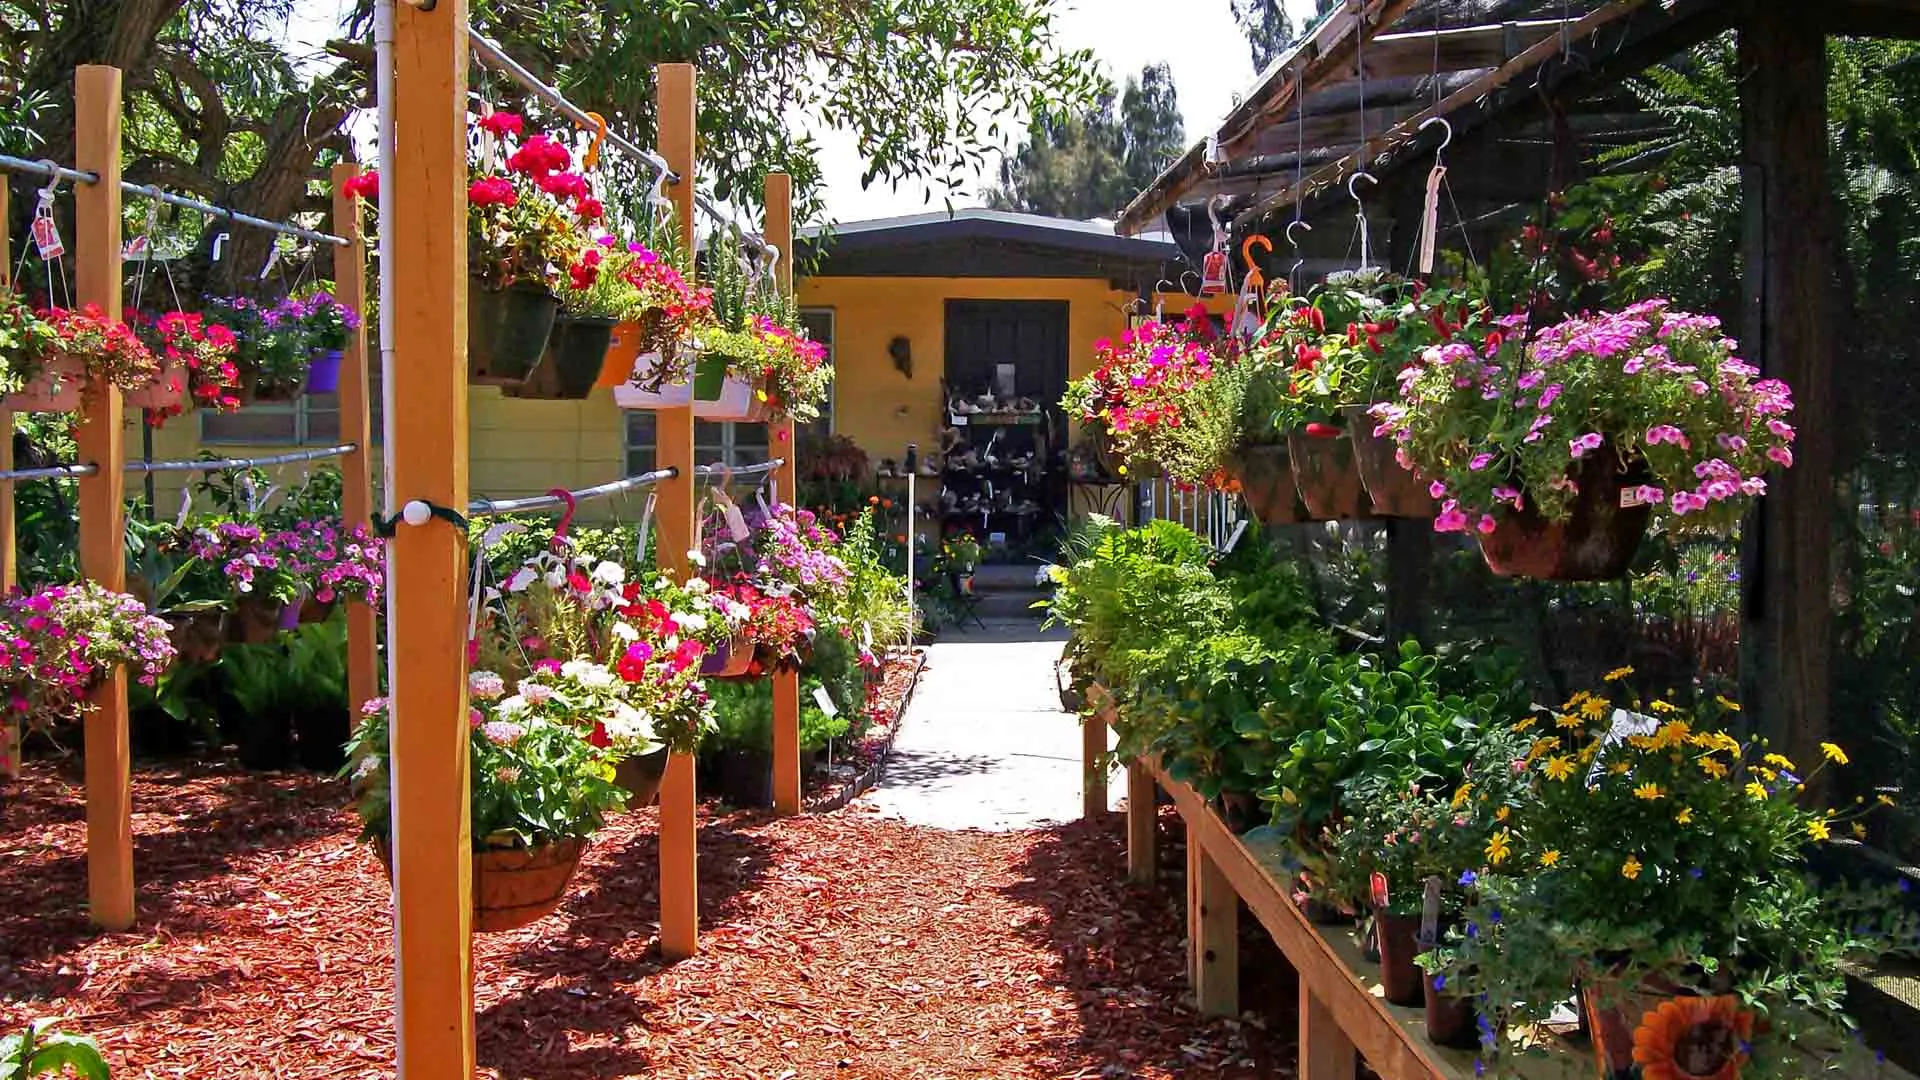 Background of hanging flower baskets at Sunman's Nursery in Fort Myers, FL.